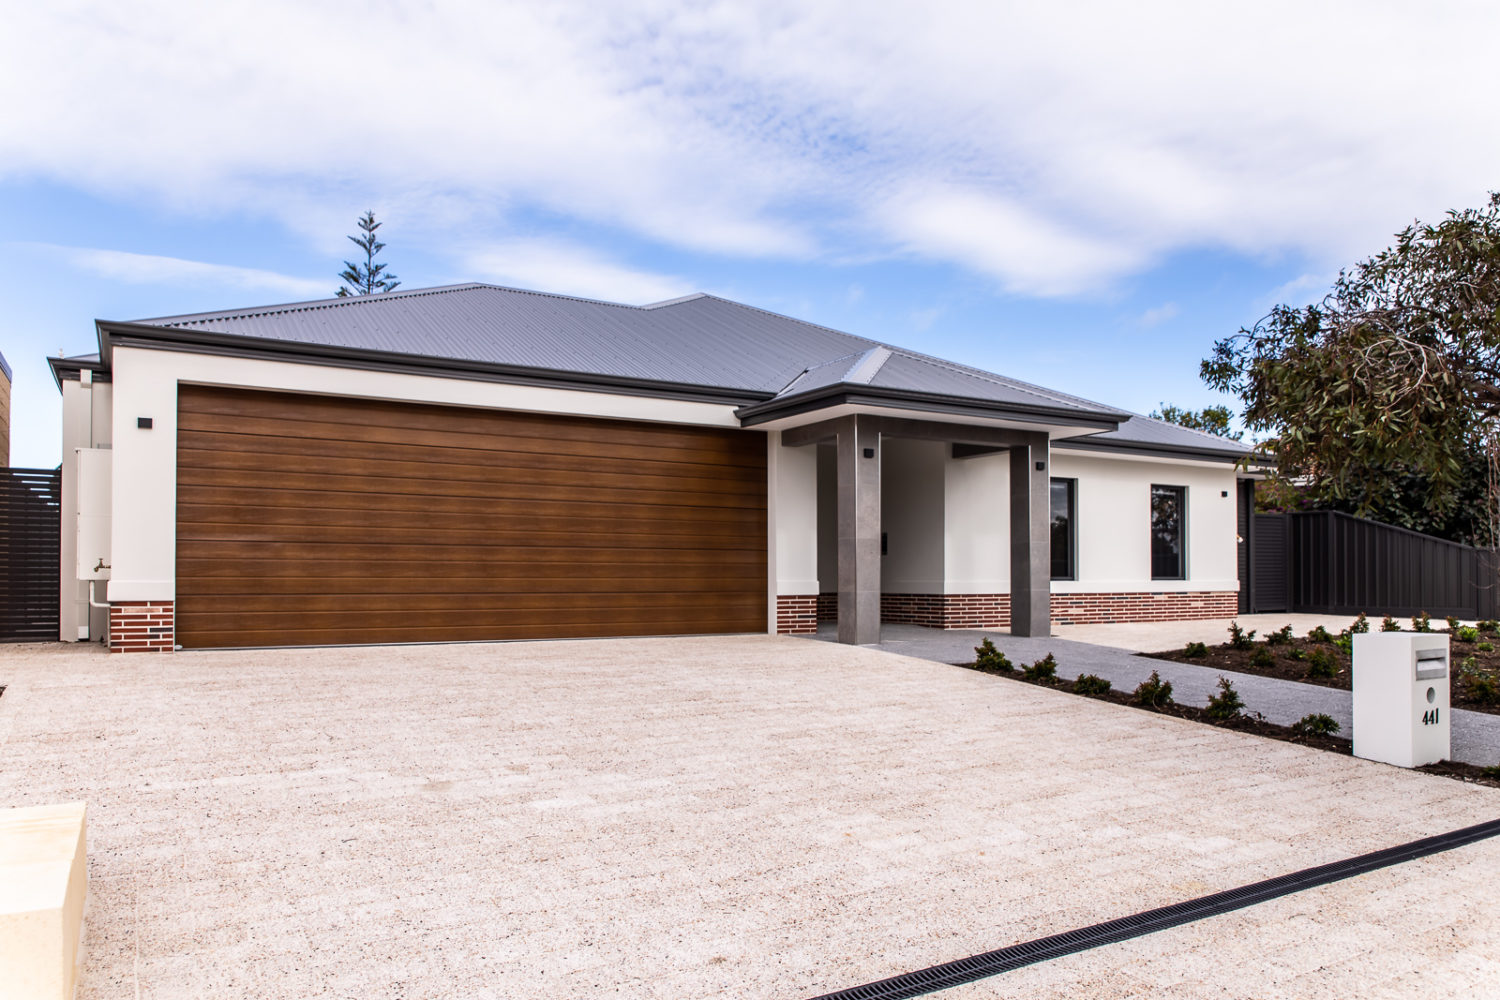 A look at the one of the first Specialist Disability Accommodation (SDA) Certified Homes in Perth